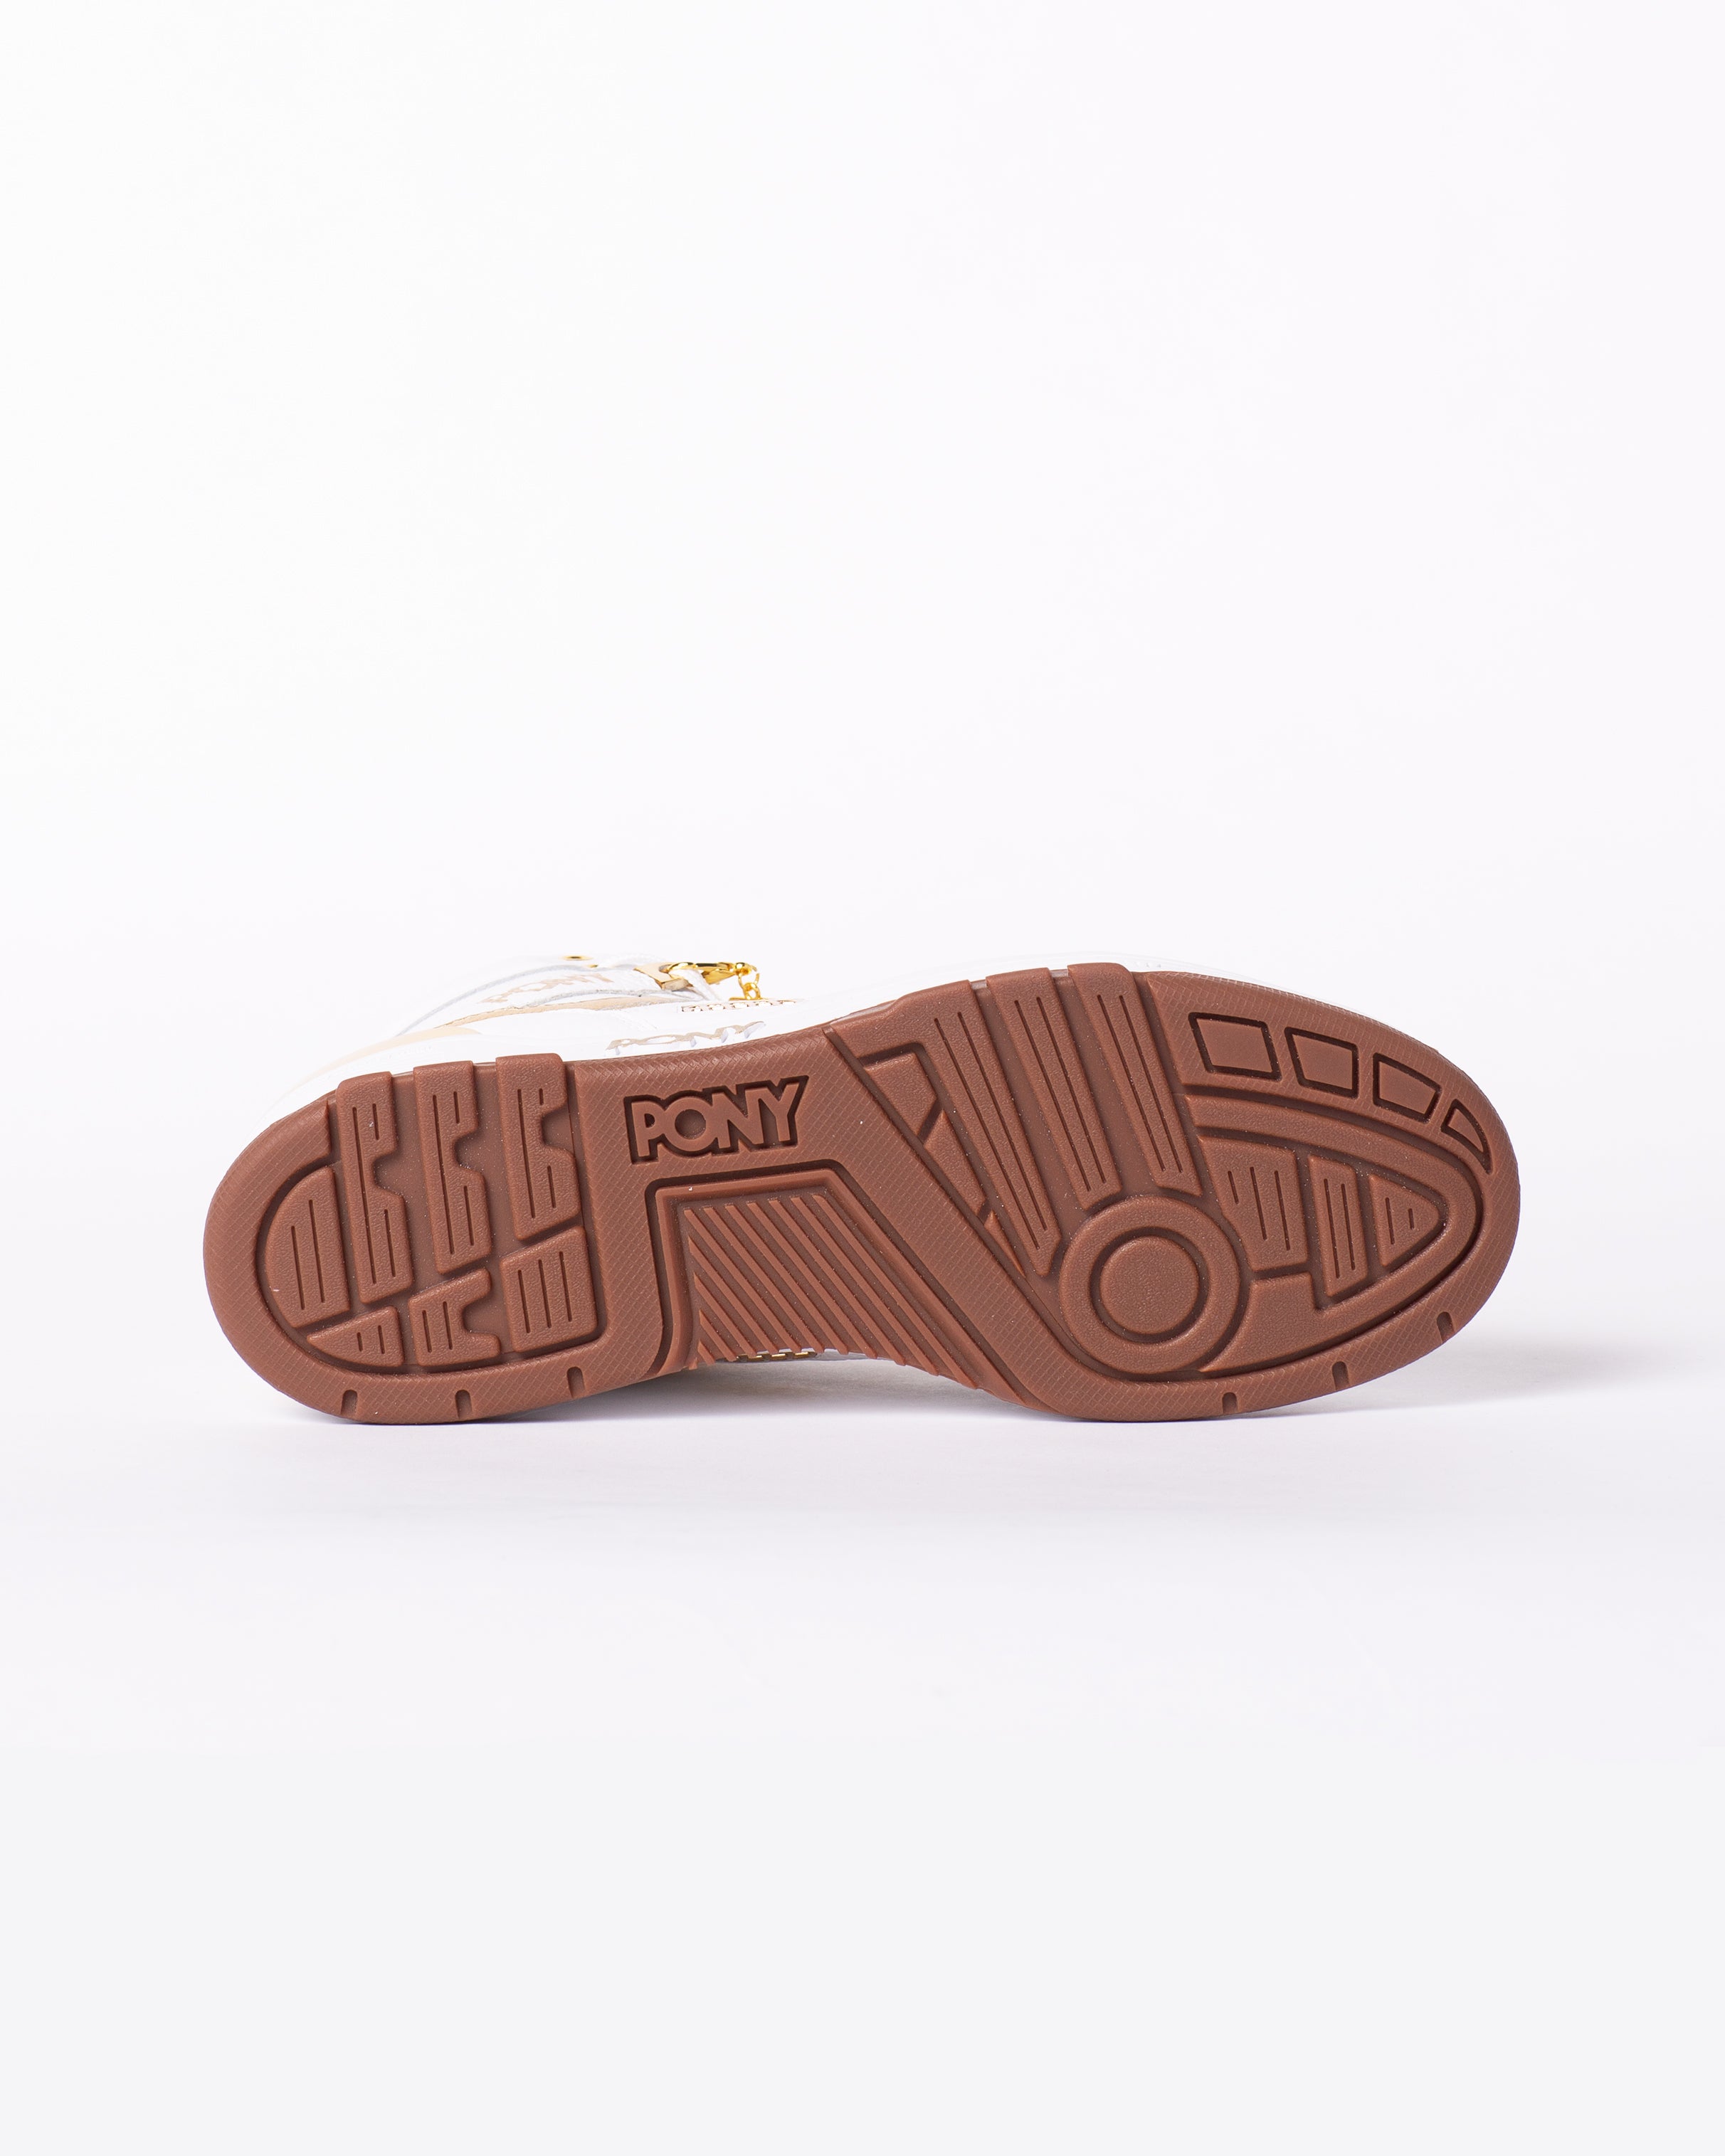 Sole of pony shoe, shoe on its side facing right with PONY word mark and classic circle on foot